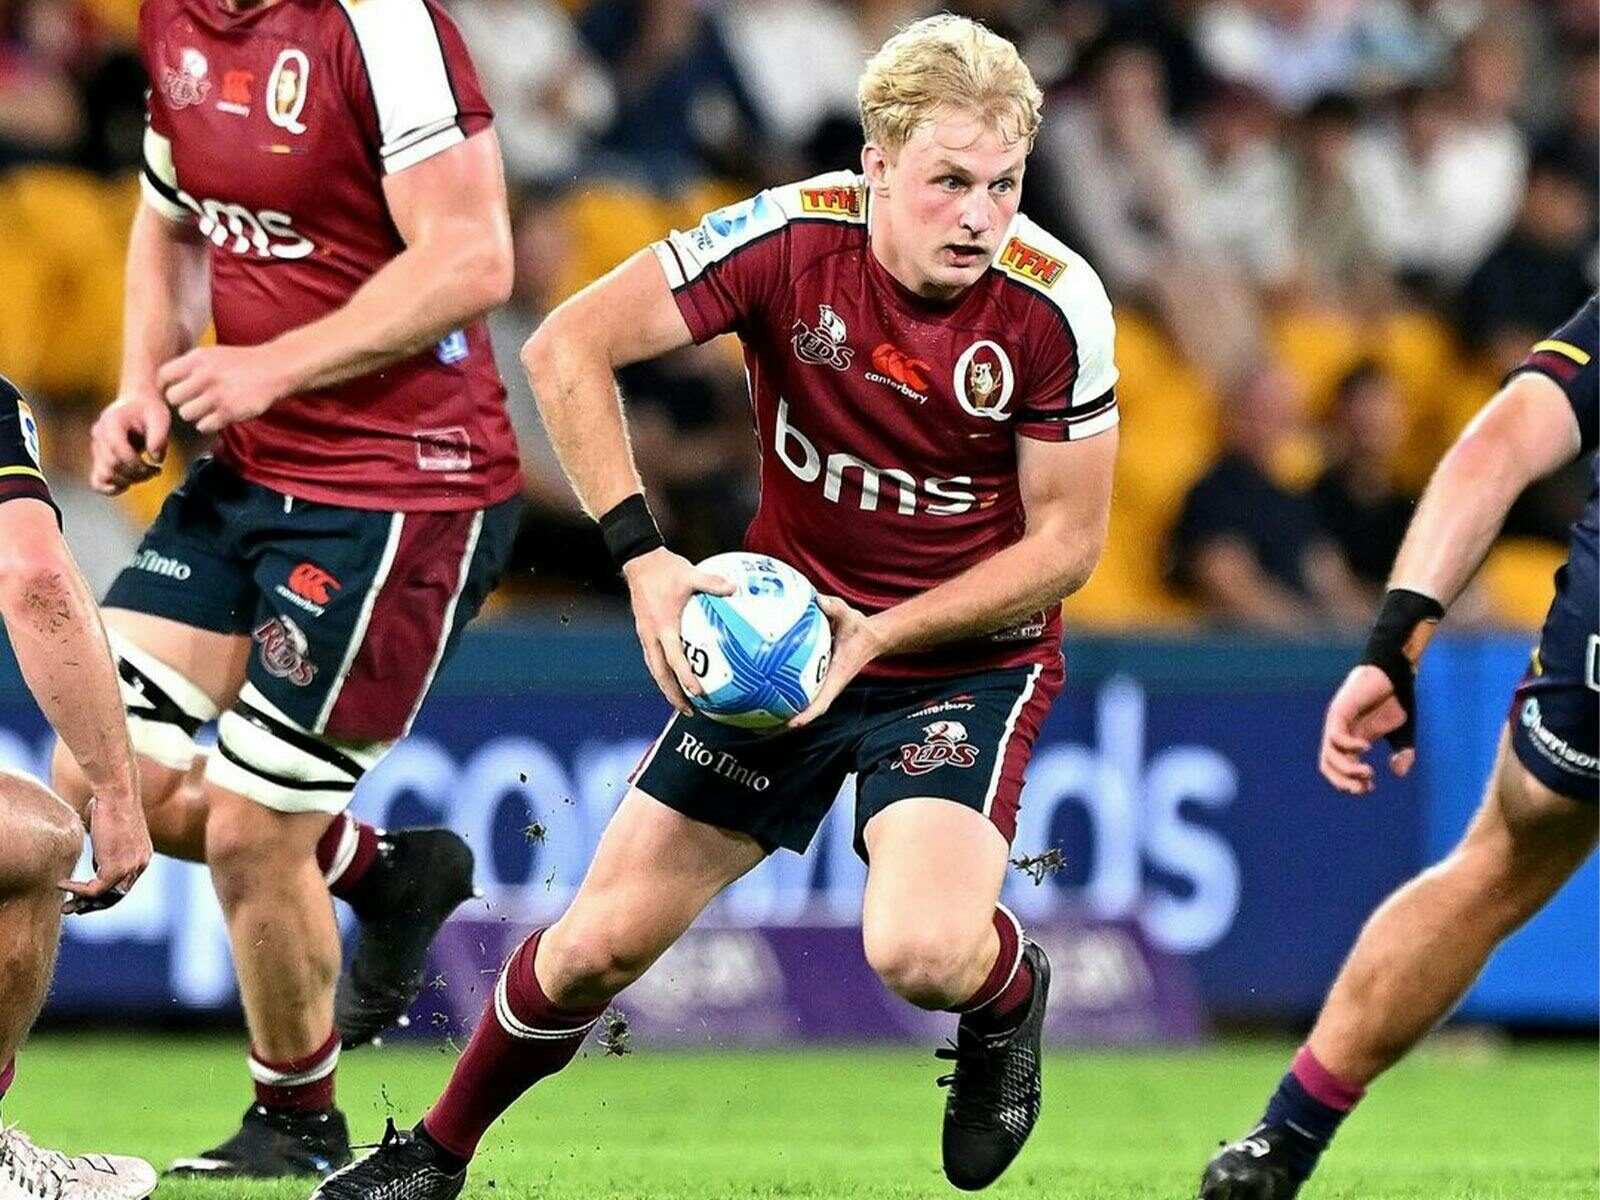 Tom Lynagh playing rugby union with the ball in hand for the Queensland Reds at Suncorp Stadium